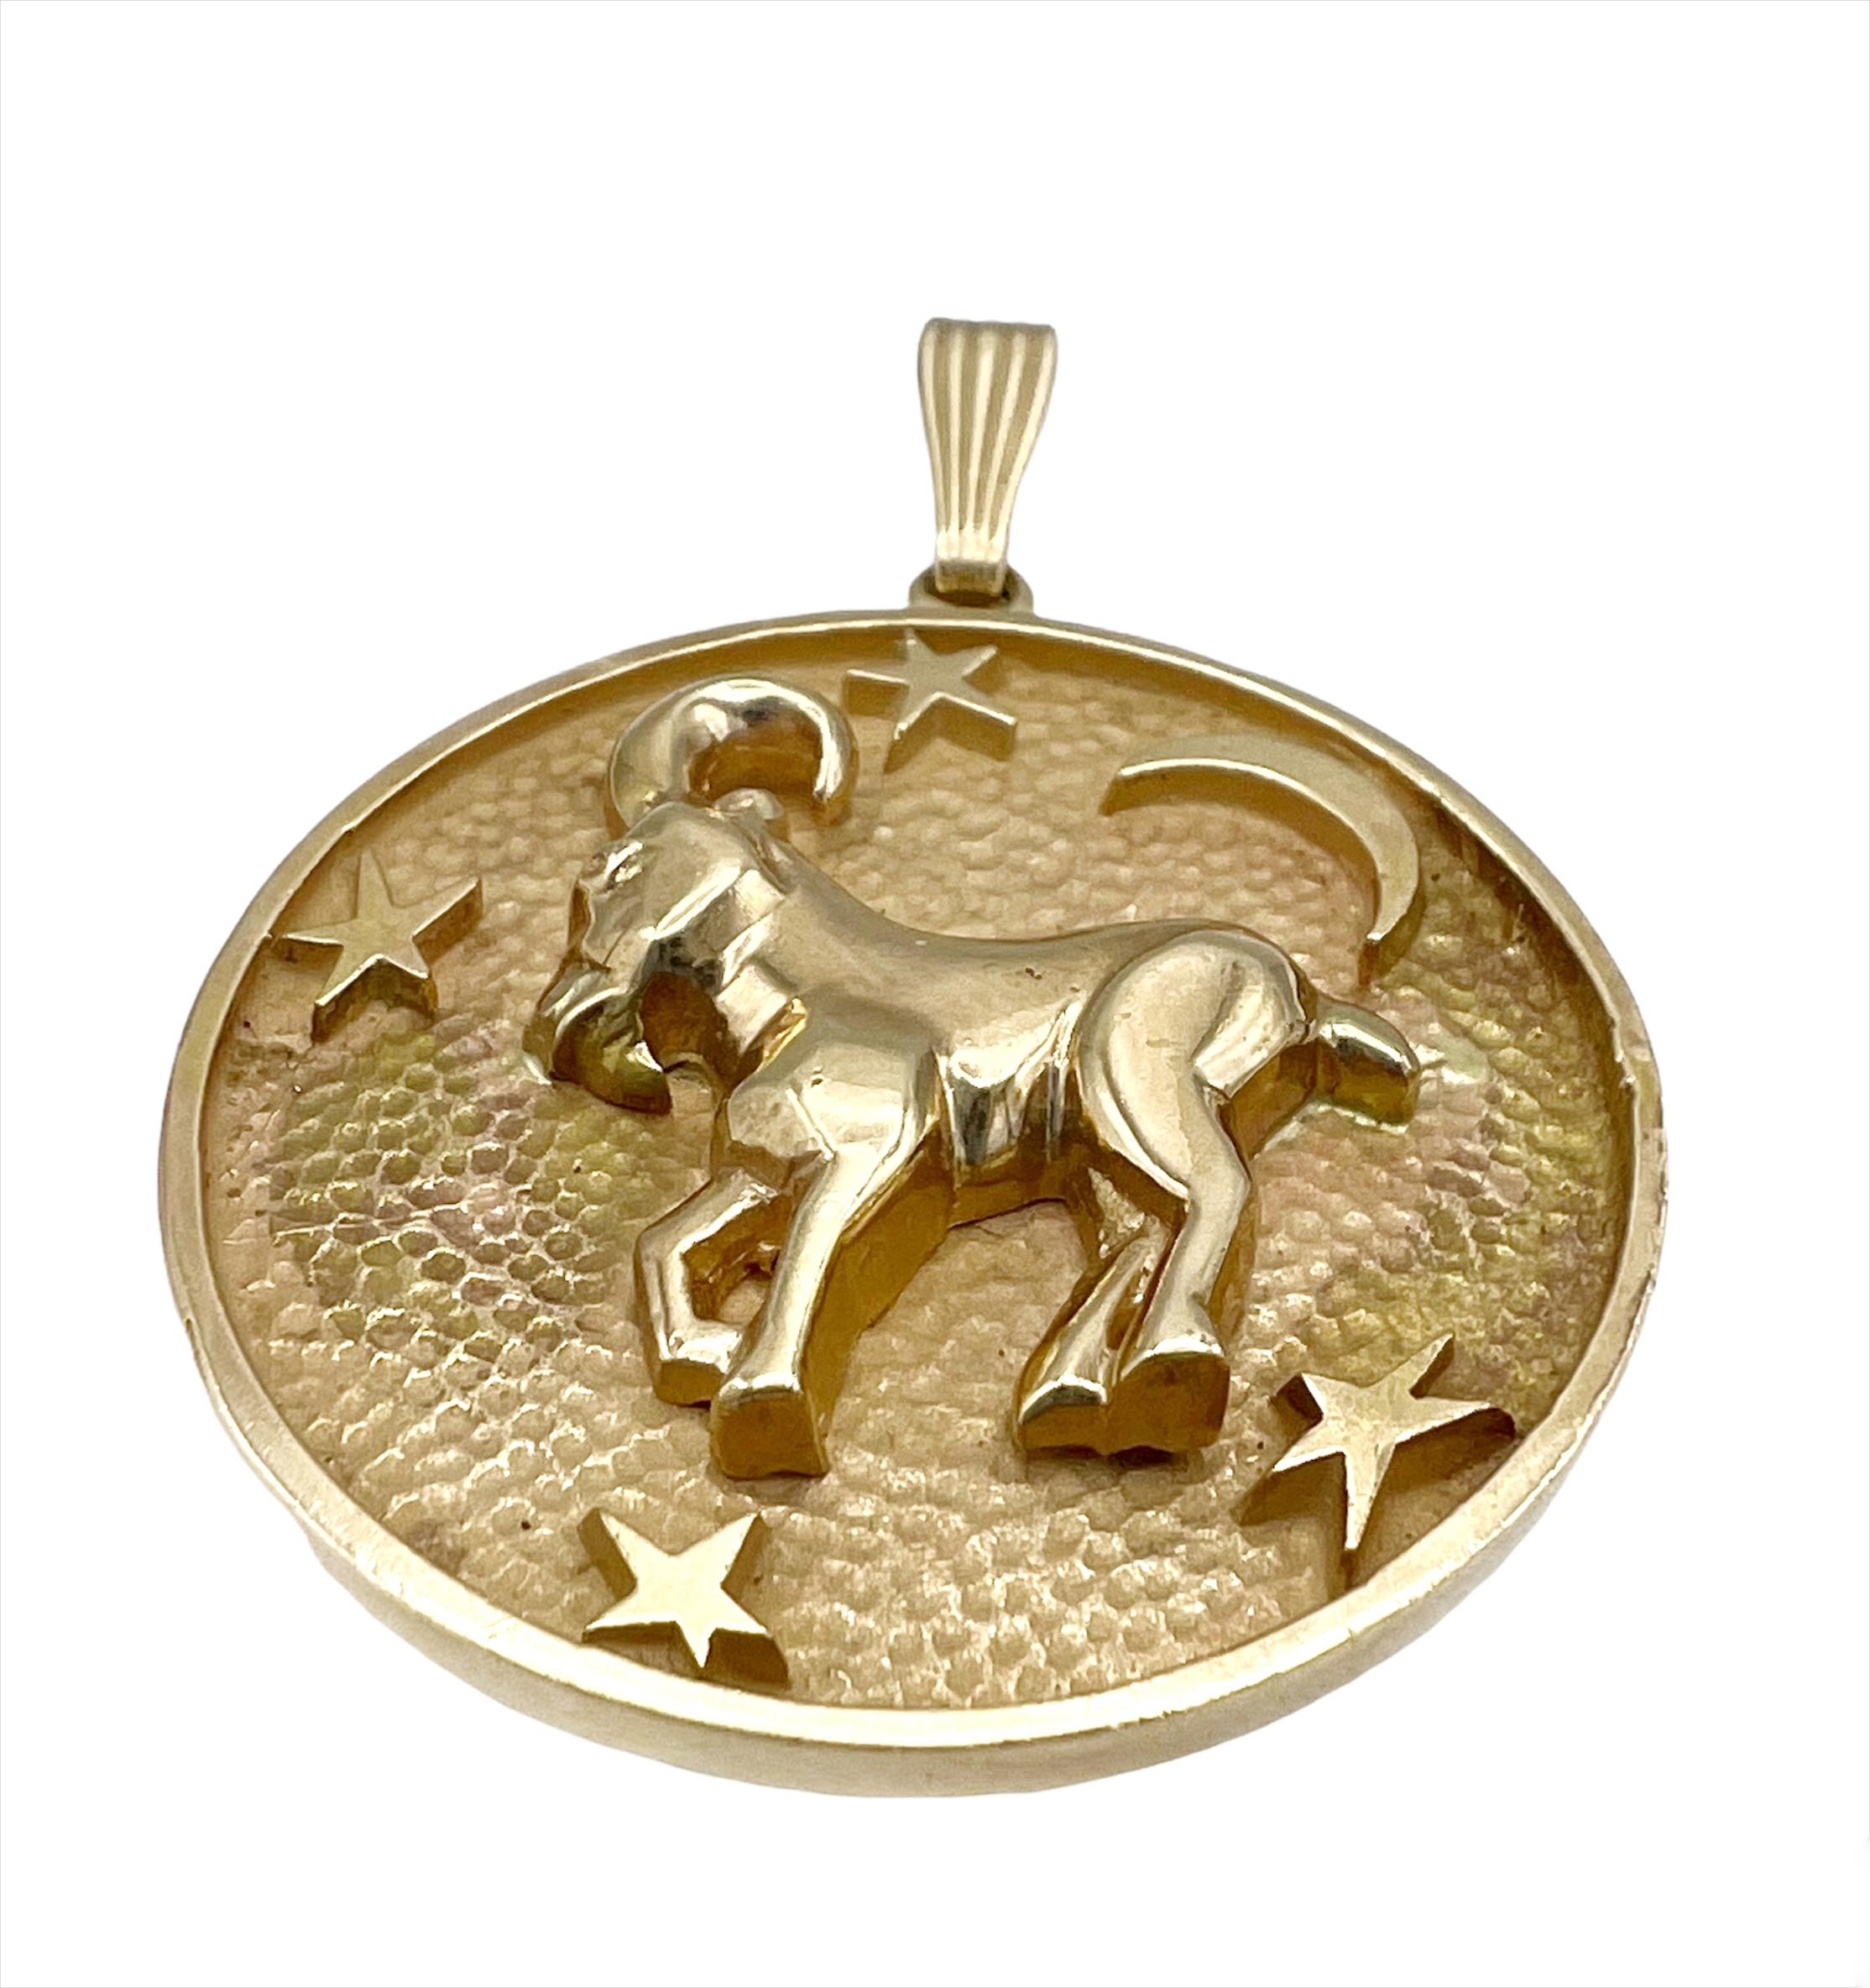 CIRCA: 1980
MATERIALS: 14K Yellow Gold
WEIGHT: 19.3 grams
MEASUREMENTS: 1- 3/8” diameter of the pendant, 2” diameter and the bail
HALLMARKS: 14K

Details:
A vintage gold astrological pendant, Capricorn sign, made of 14k gold.

​ A great Capricorn